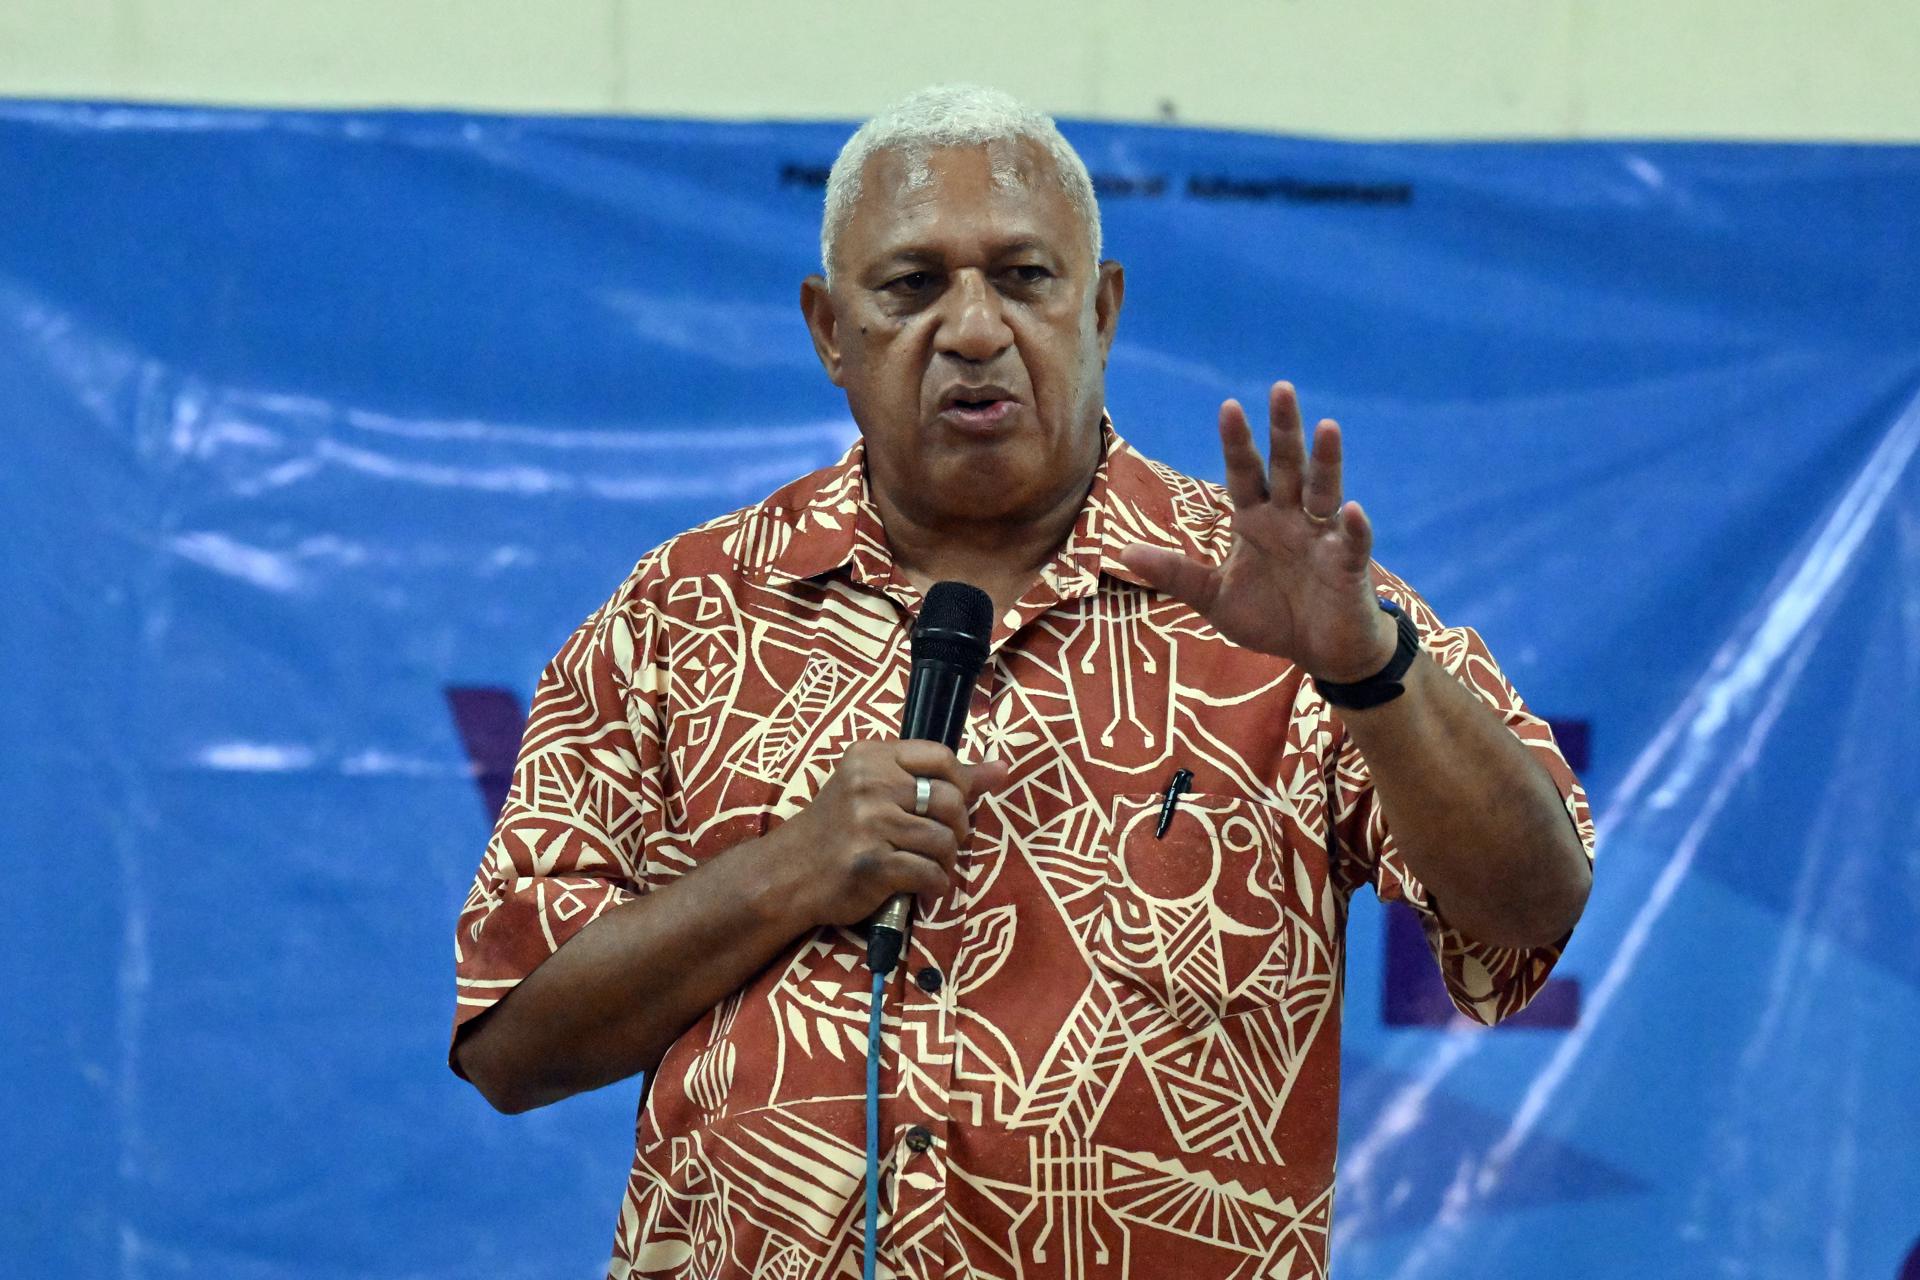 Fiji's Prime Minister and FijiFirst leader Frank Bainimarama speaks to supporters at a community hall meeting during the Fijian election campaign in Suva, Fiji, 11 December 2022. EFE-EPA FILE/MICK TSIKAS AUSTRALIA AND NEW ZEALAND OUT